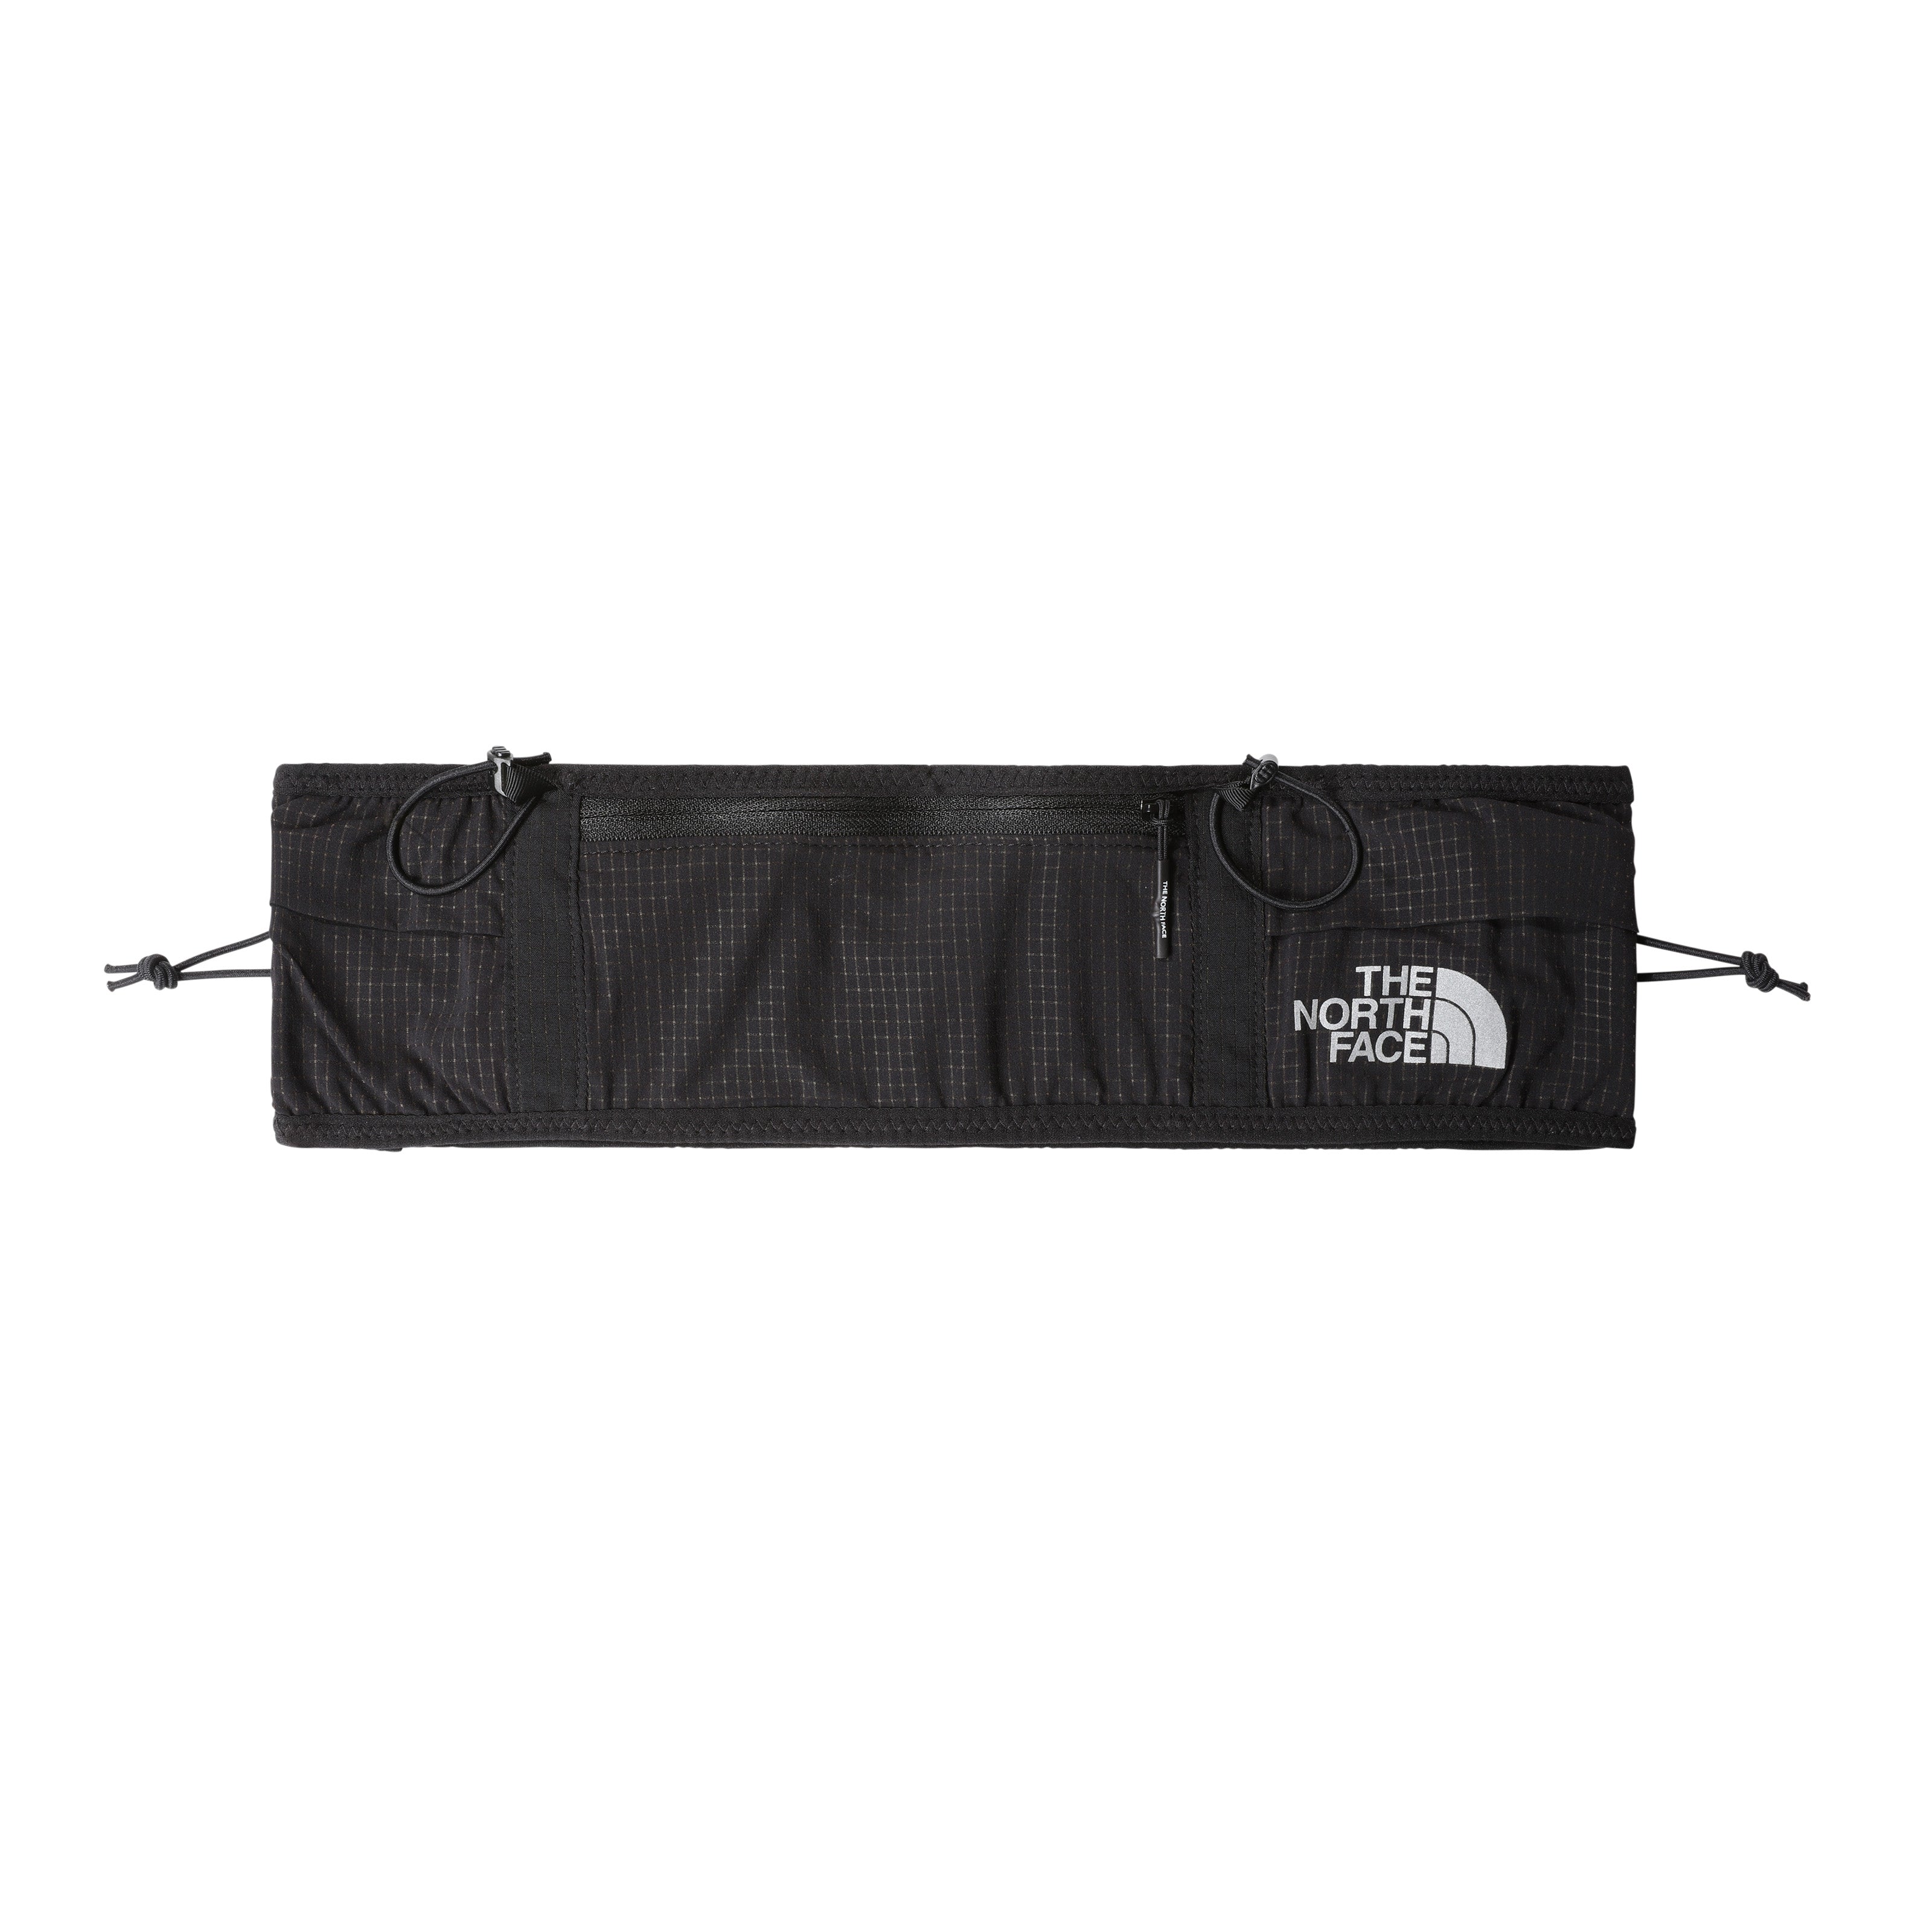 THE NORTH FACE SUMMIT RACE BELT